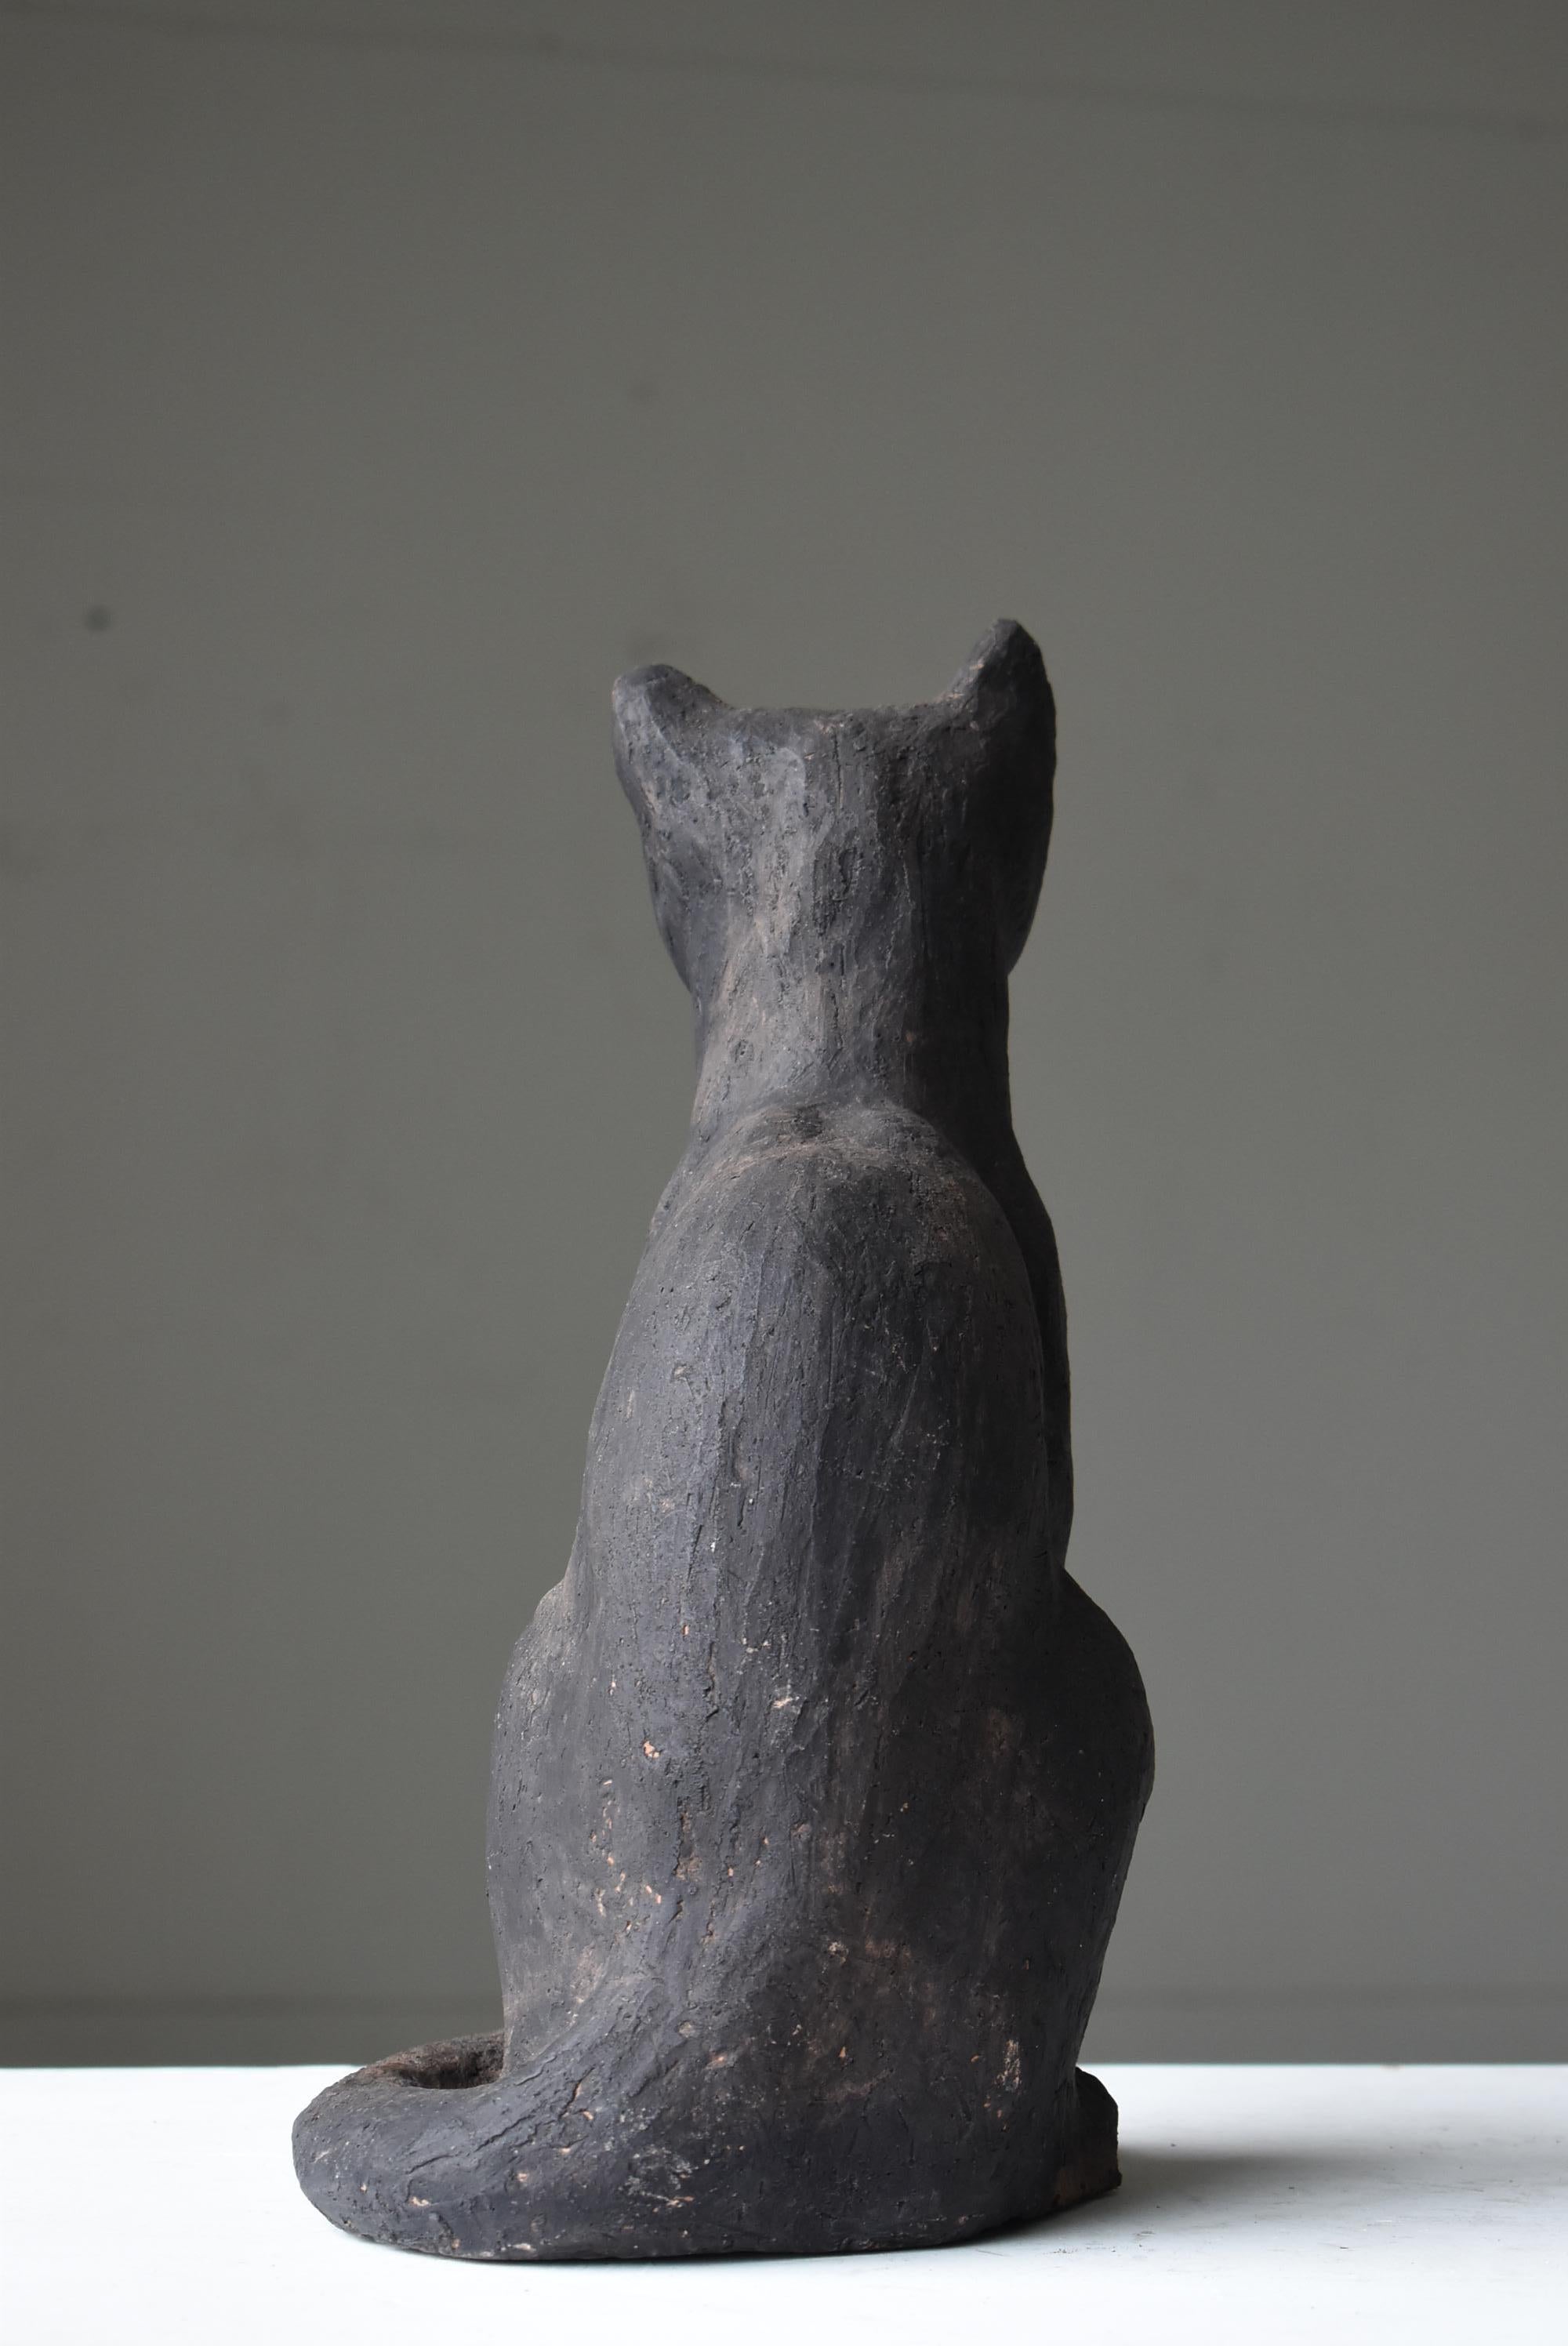 Japanese Old Clay Carving Cat 1940s-1960s / Mold Statue Wabi Sabi Scuplture   5